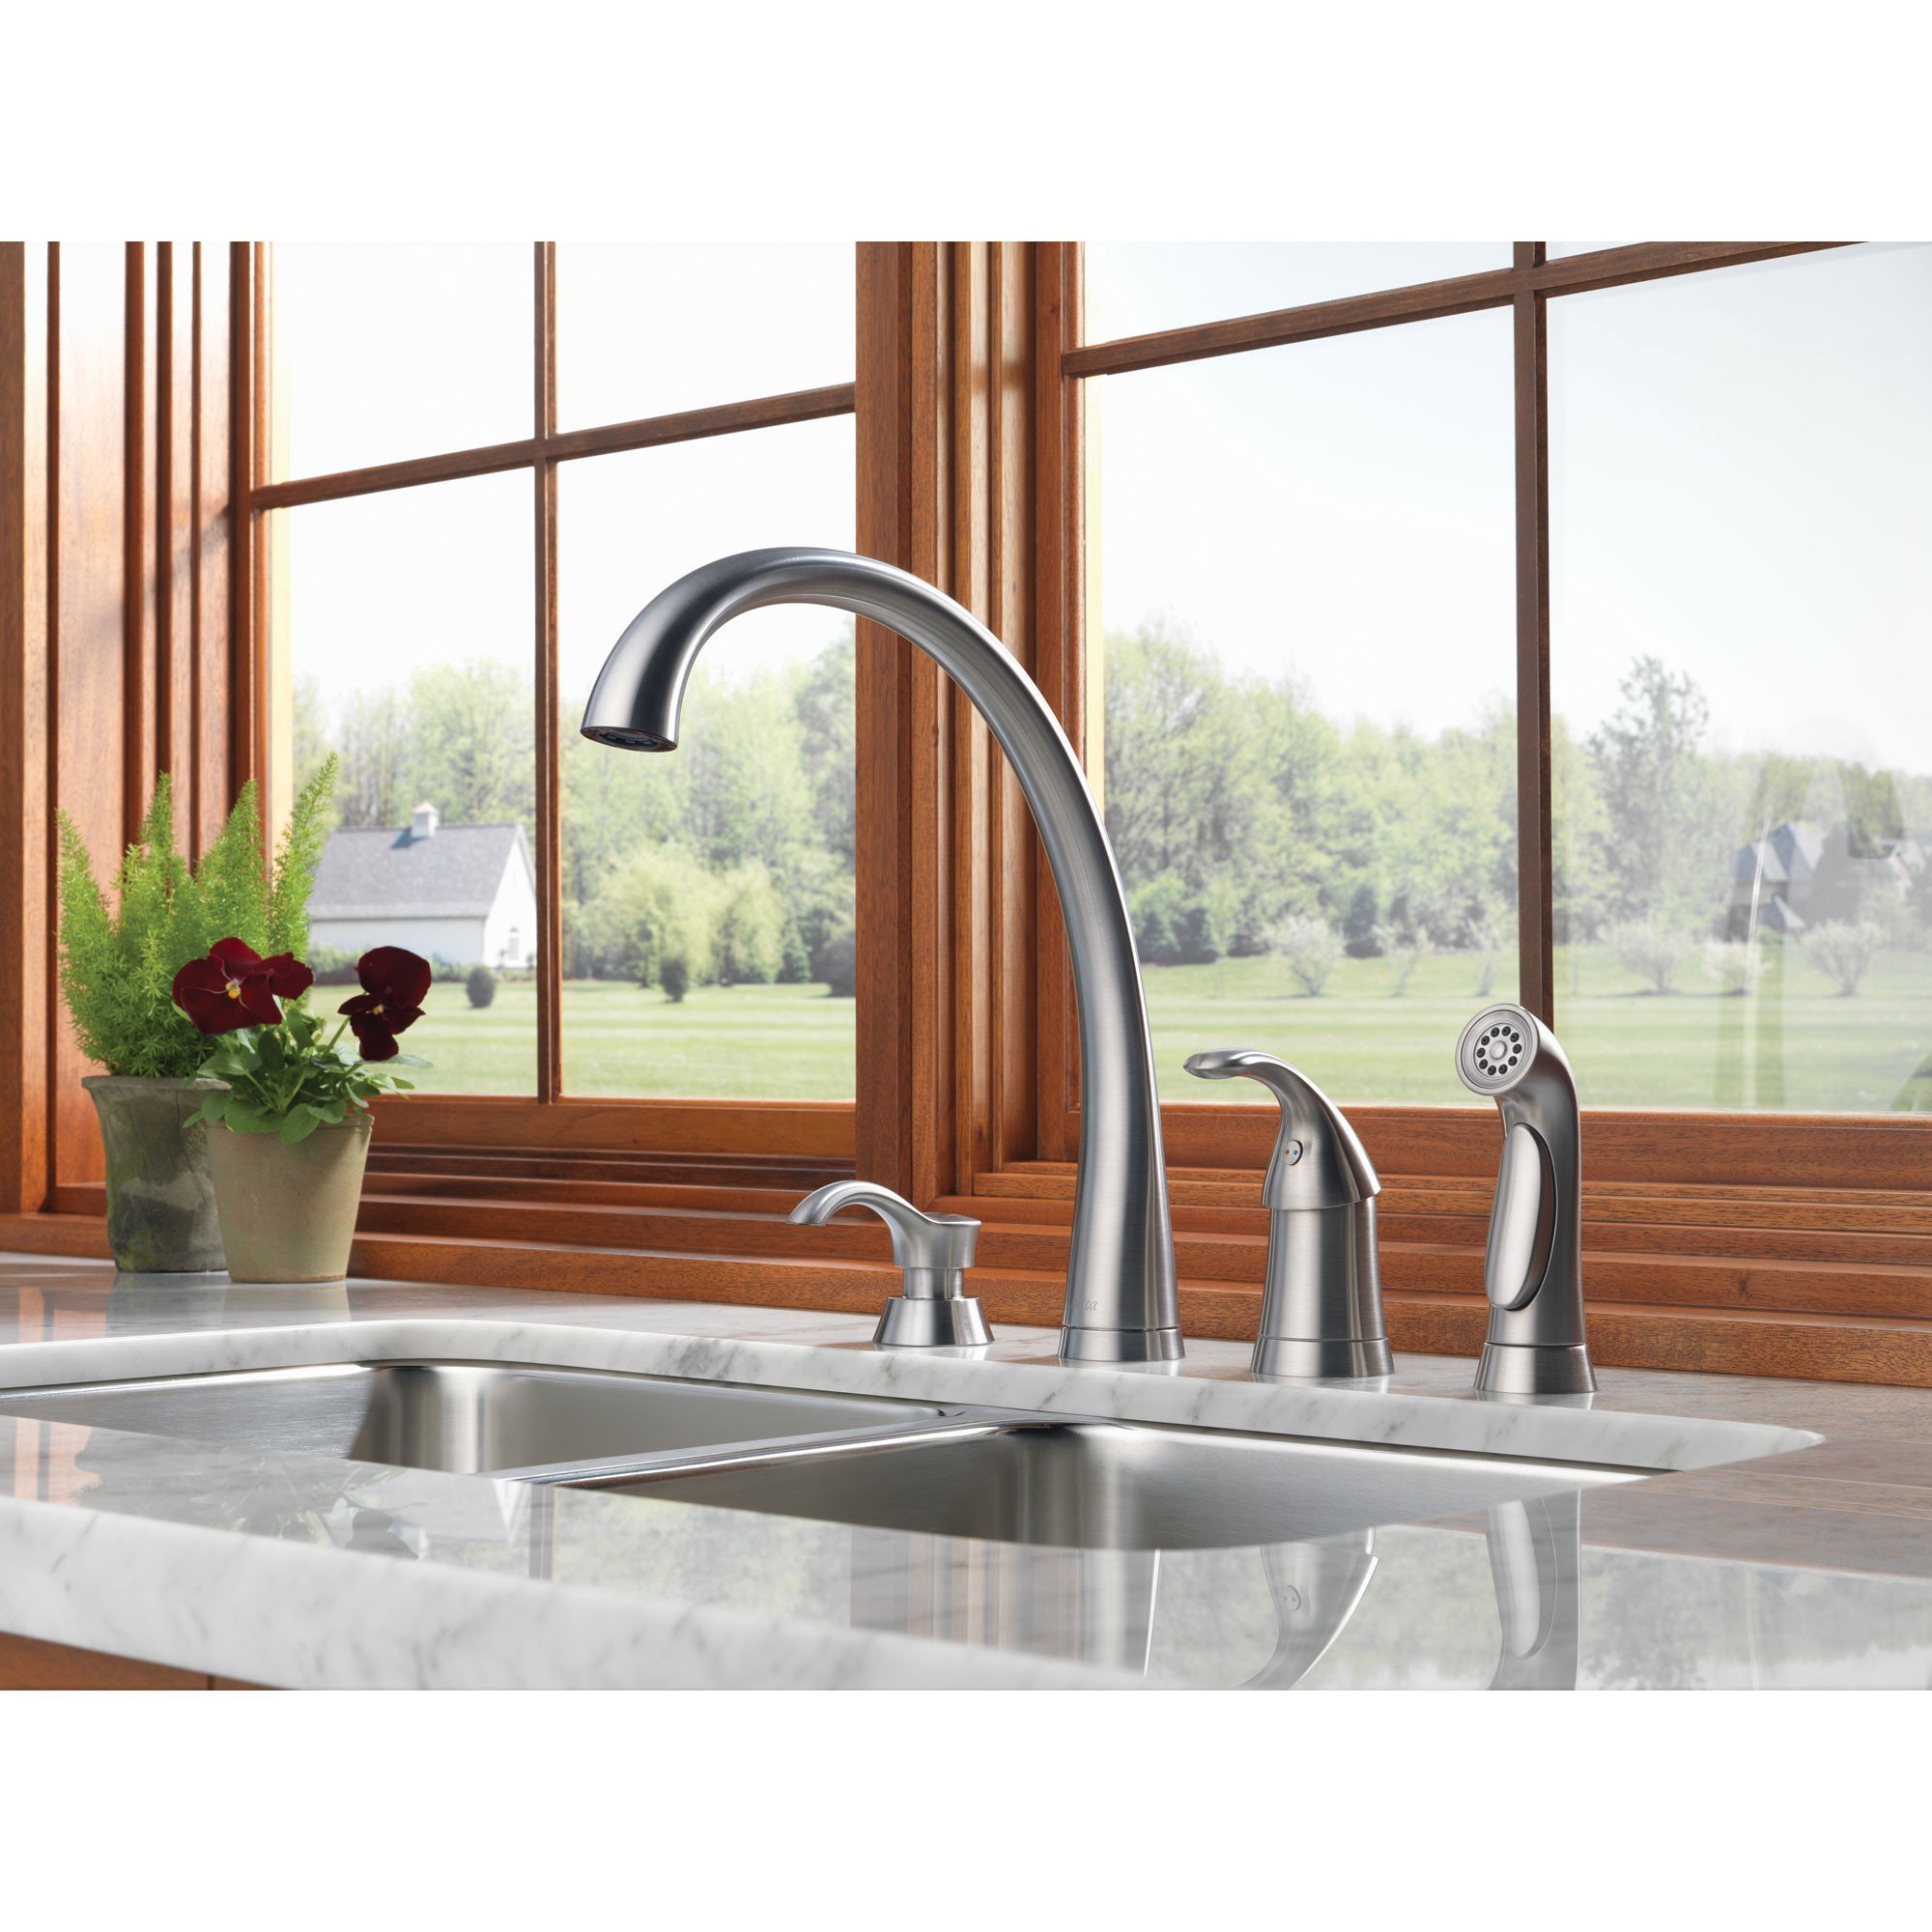 Position Faucets With Undermount Sinks